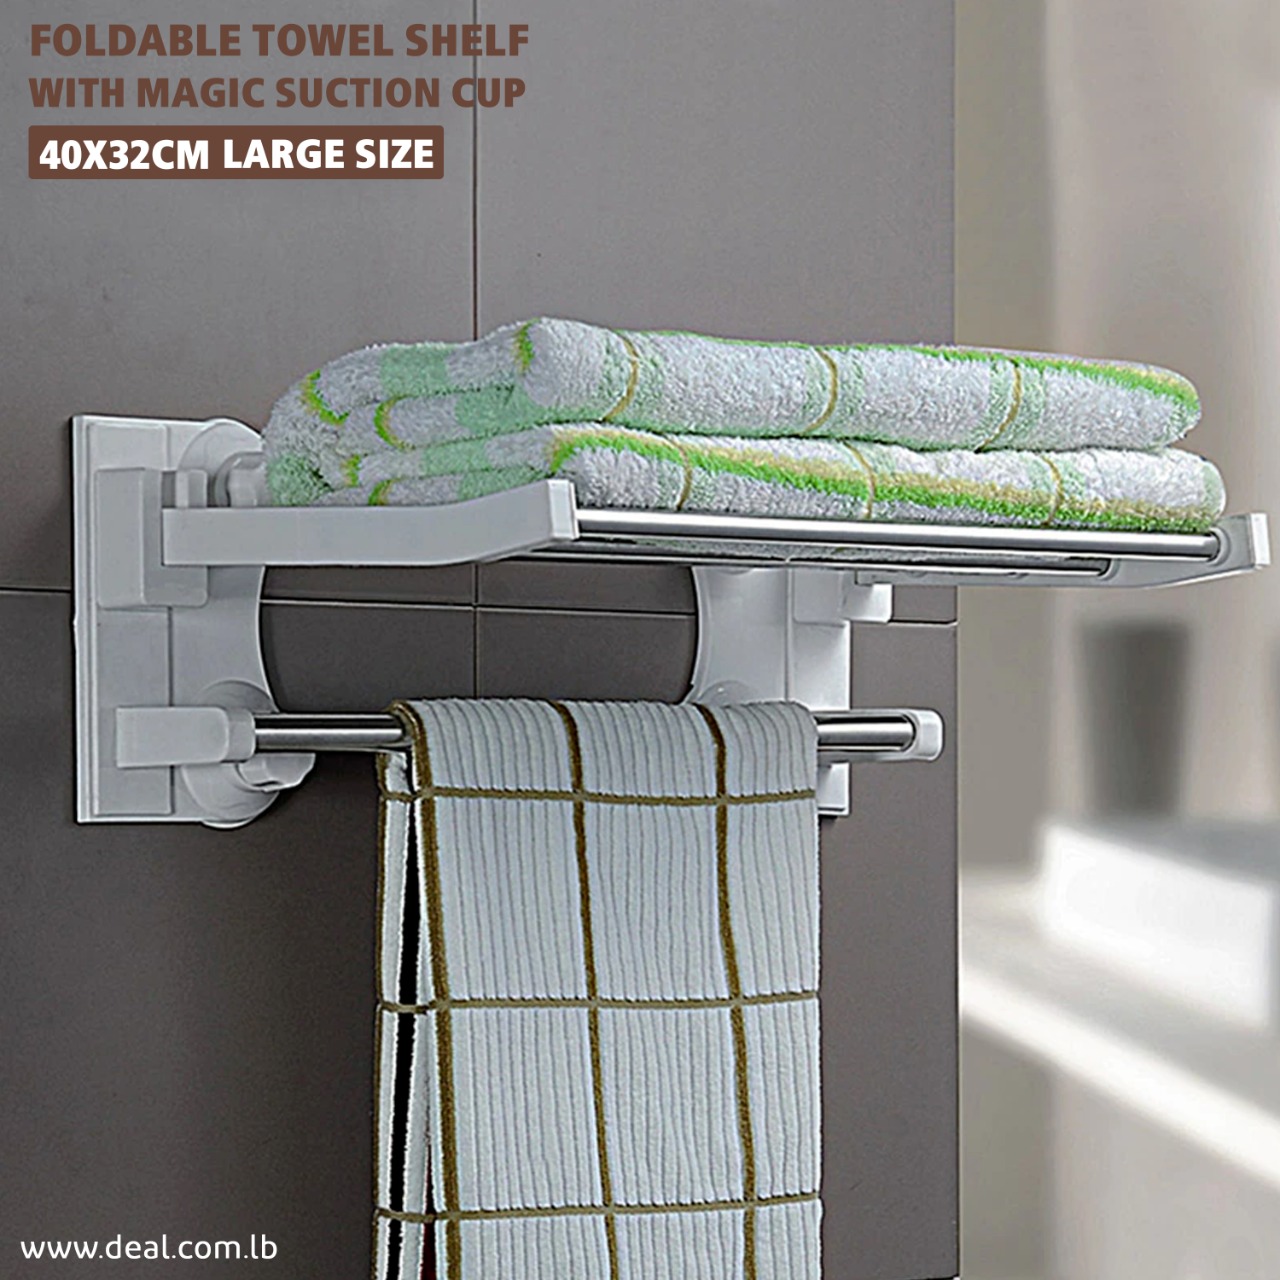 Foldable Towel Shelf With Magic Suction Cup | 40x32cm Large Size